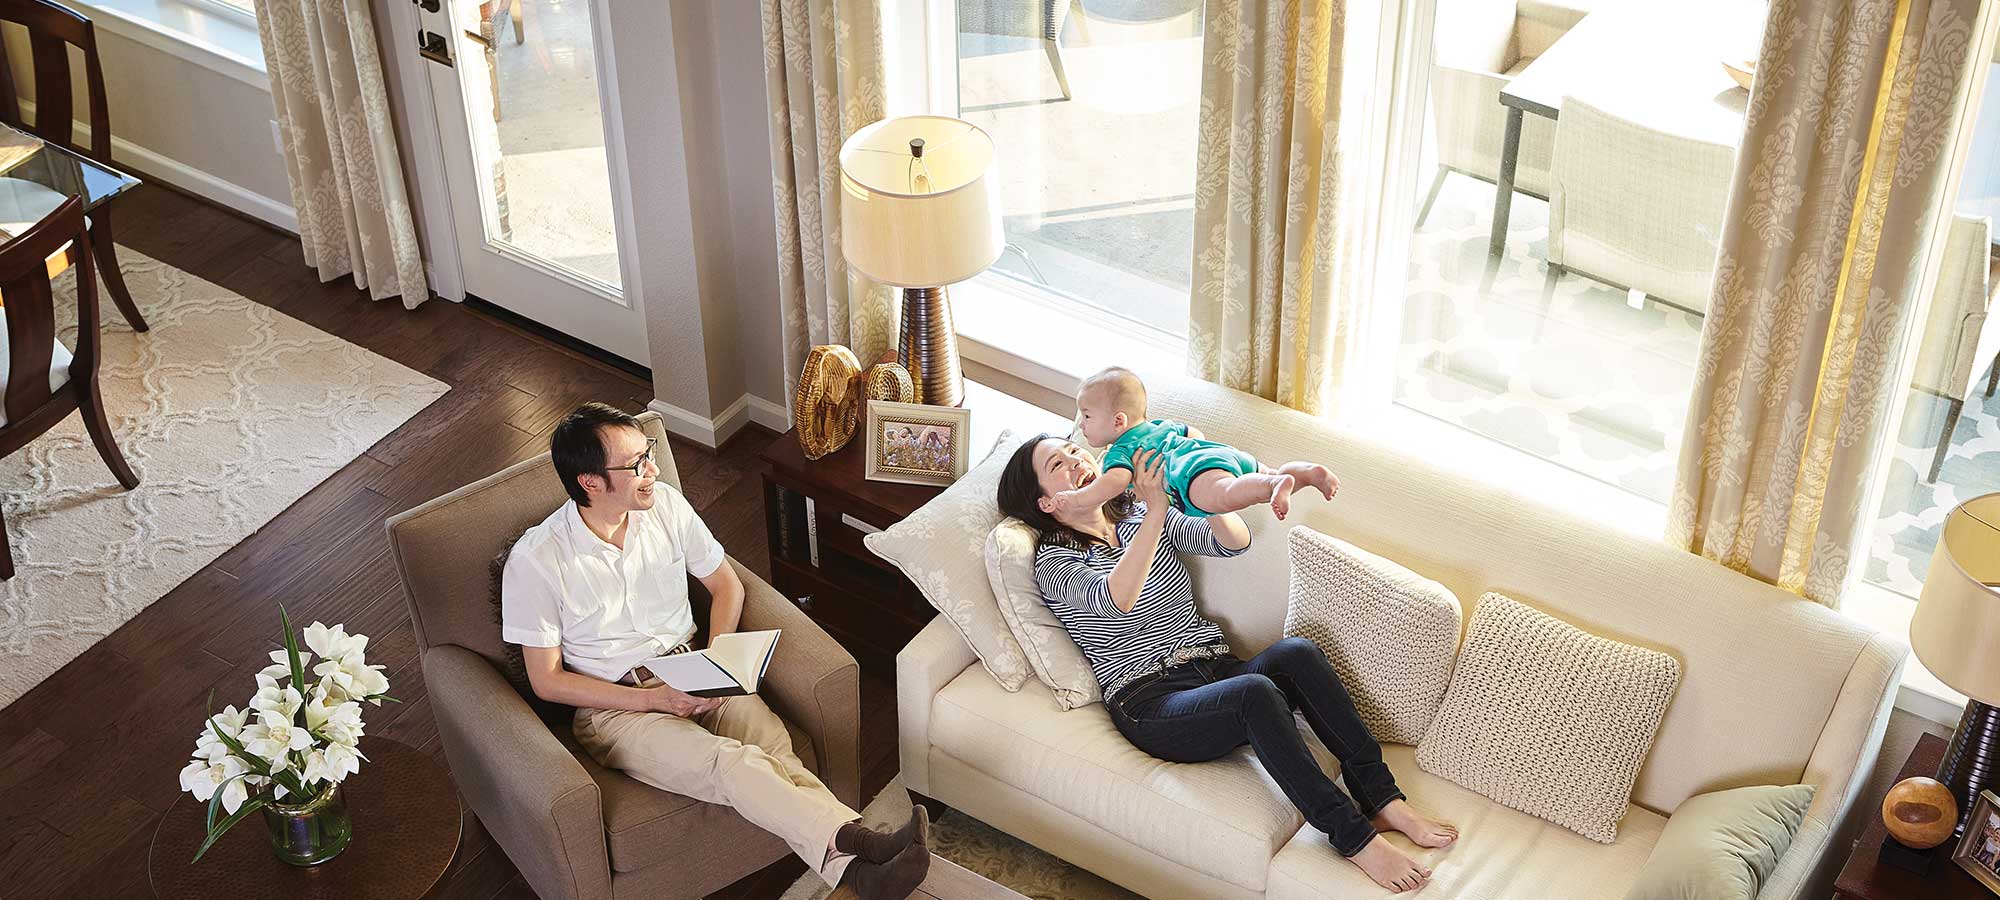 a man and woman sitting on couches by in a family room with large windows, the woman is holding a baby